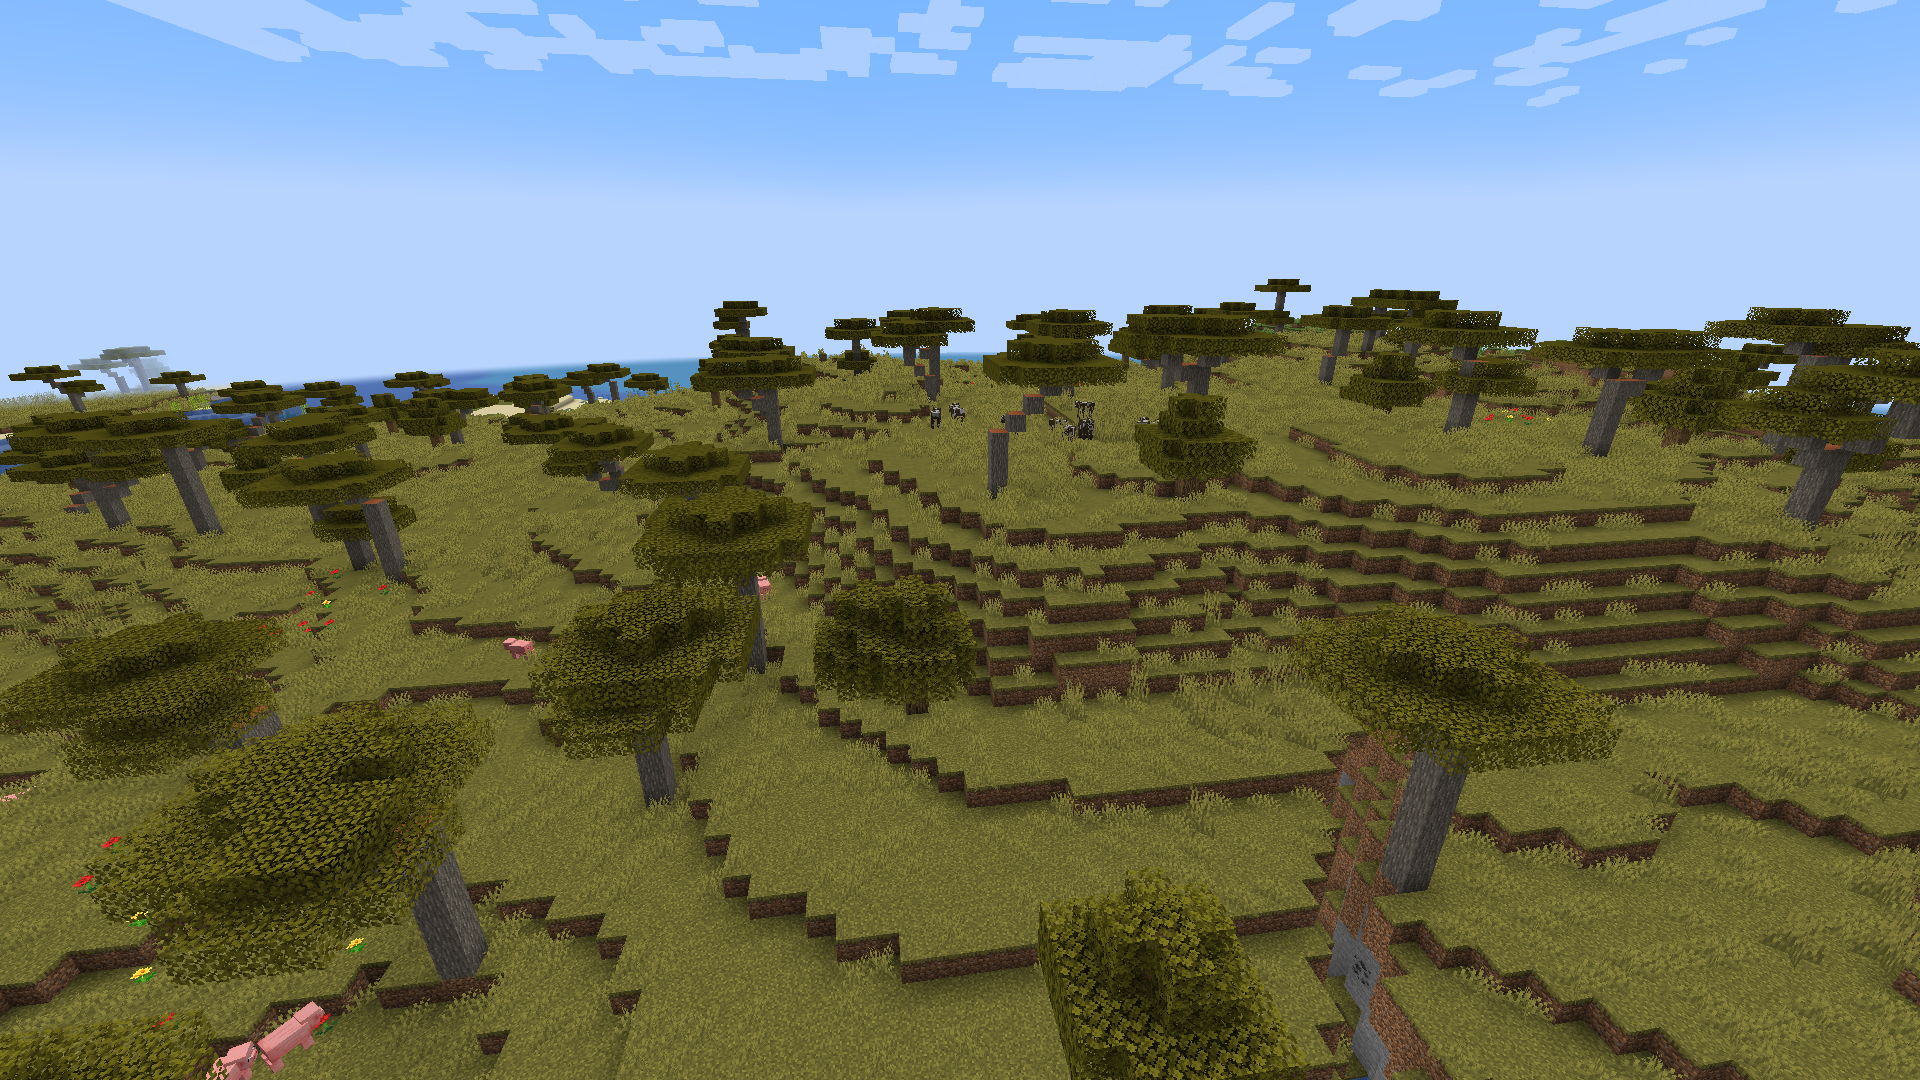 Best Minecraft mods for biomes, items, and optimization